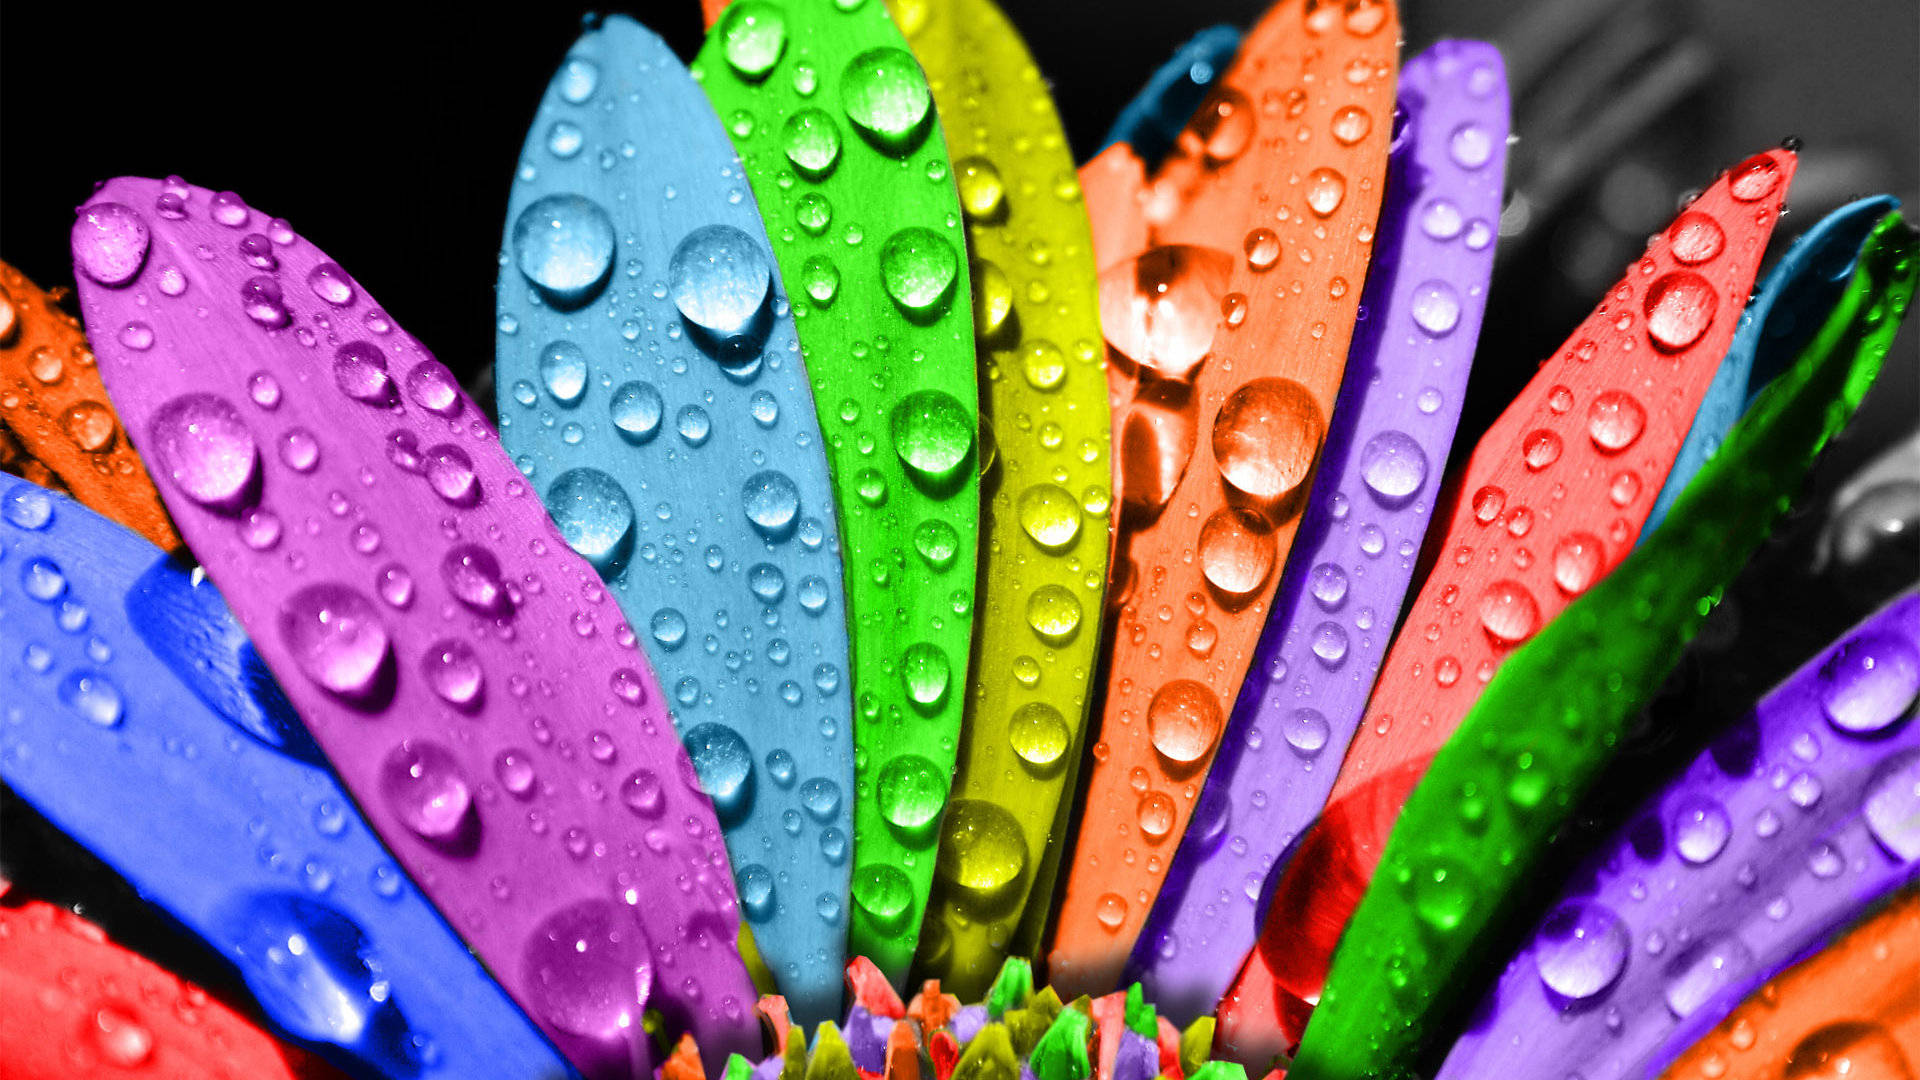 A Flower With Water Droplets Wallpaper